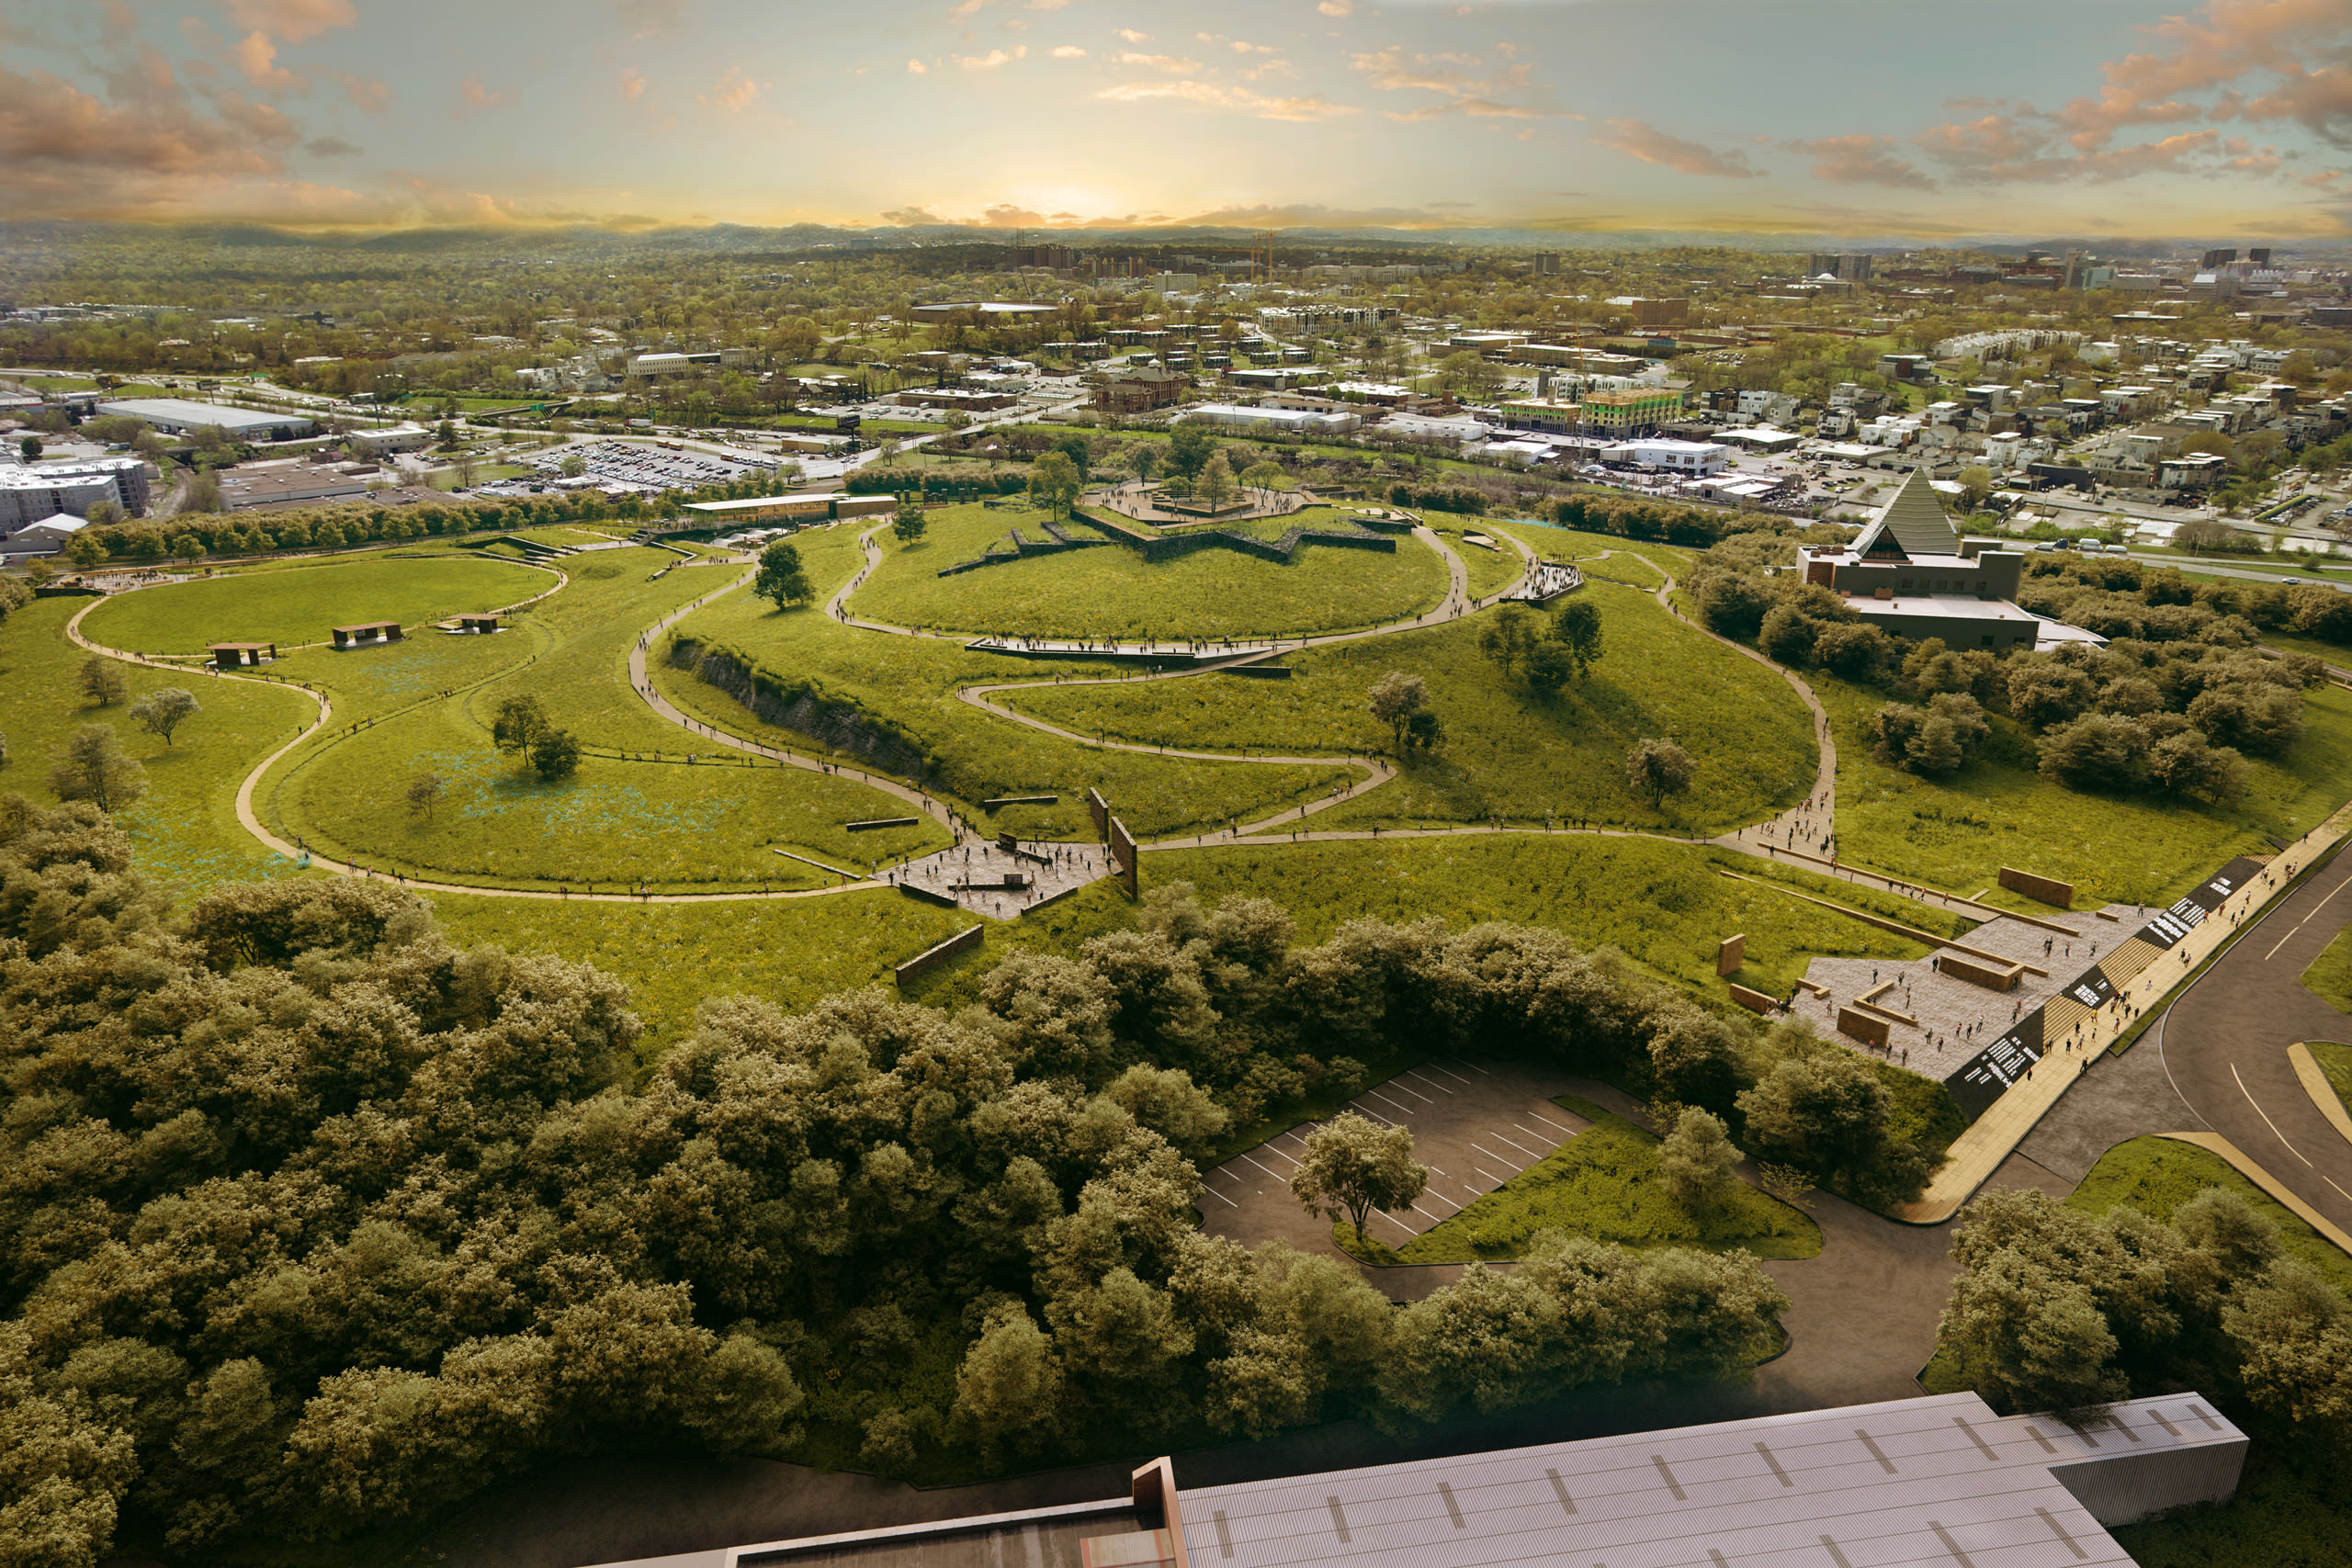 Bird-eye view 3D architectural rendering of Fort Negley Site